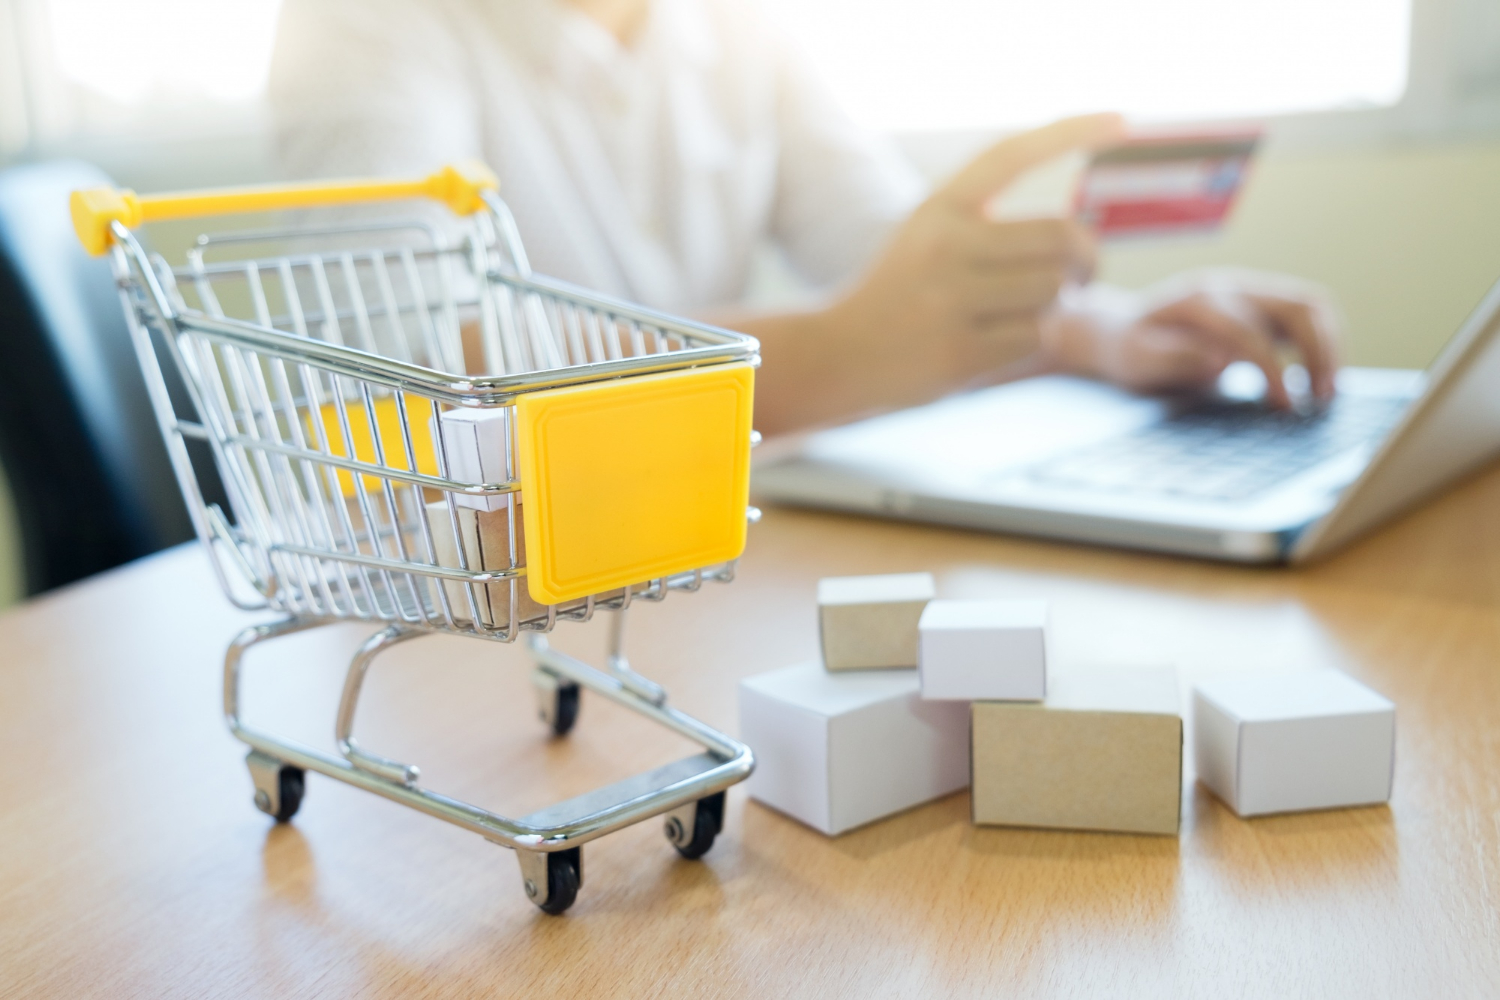 How to Protect an Online Store: 5 Tips for Secure eCommerce